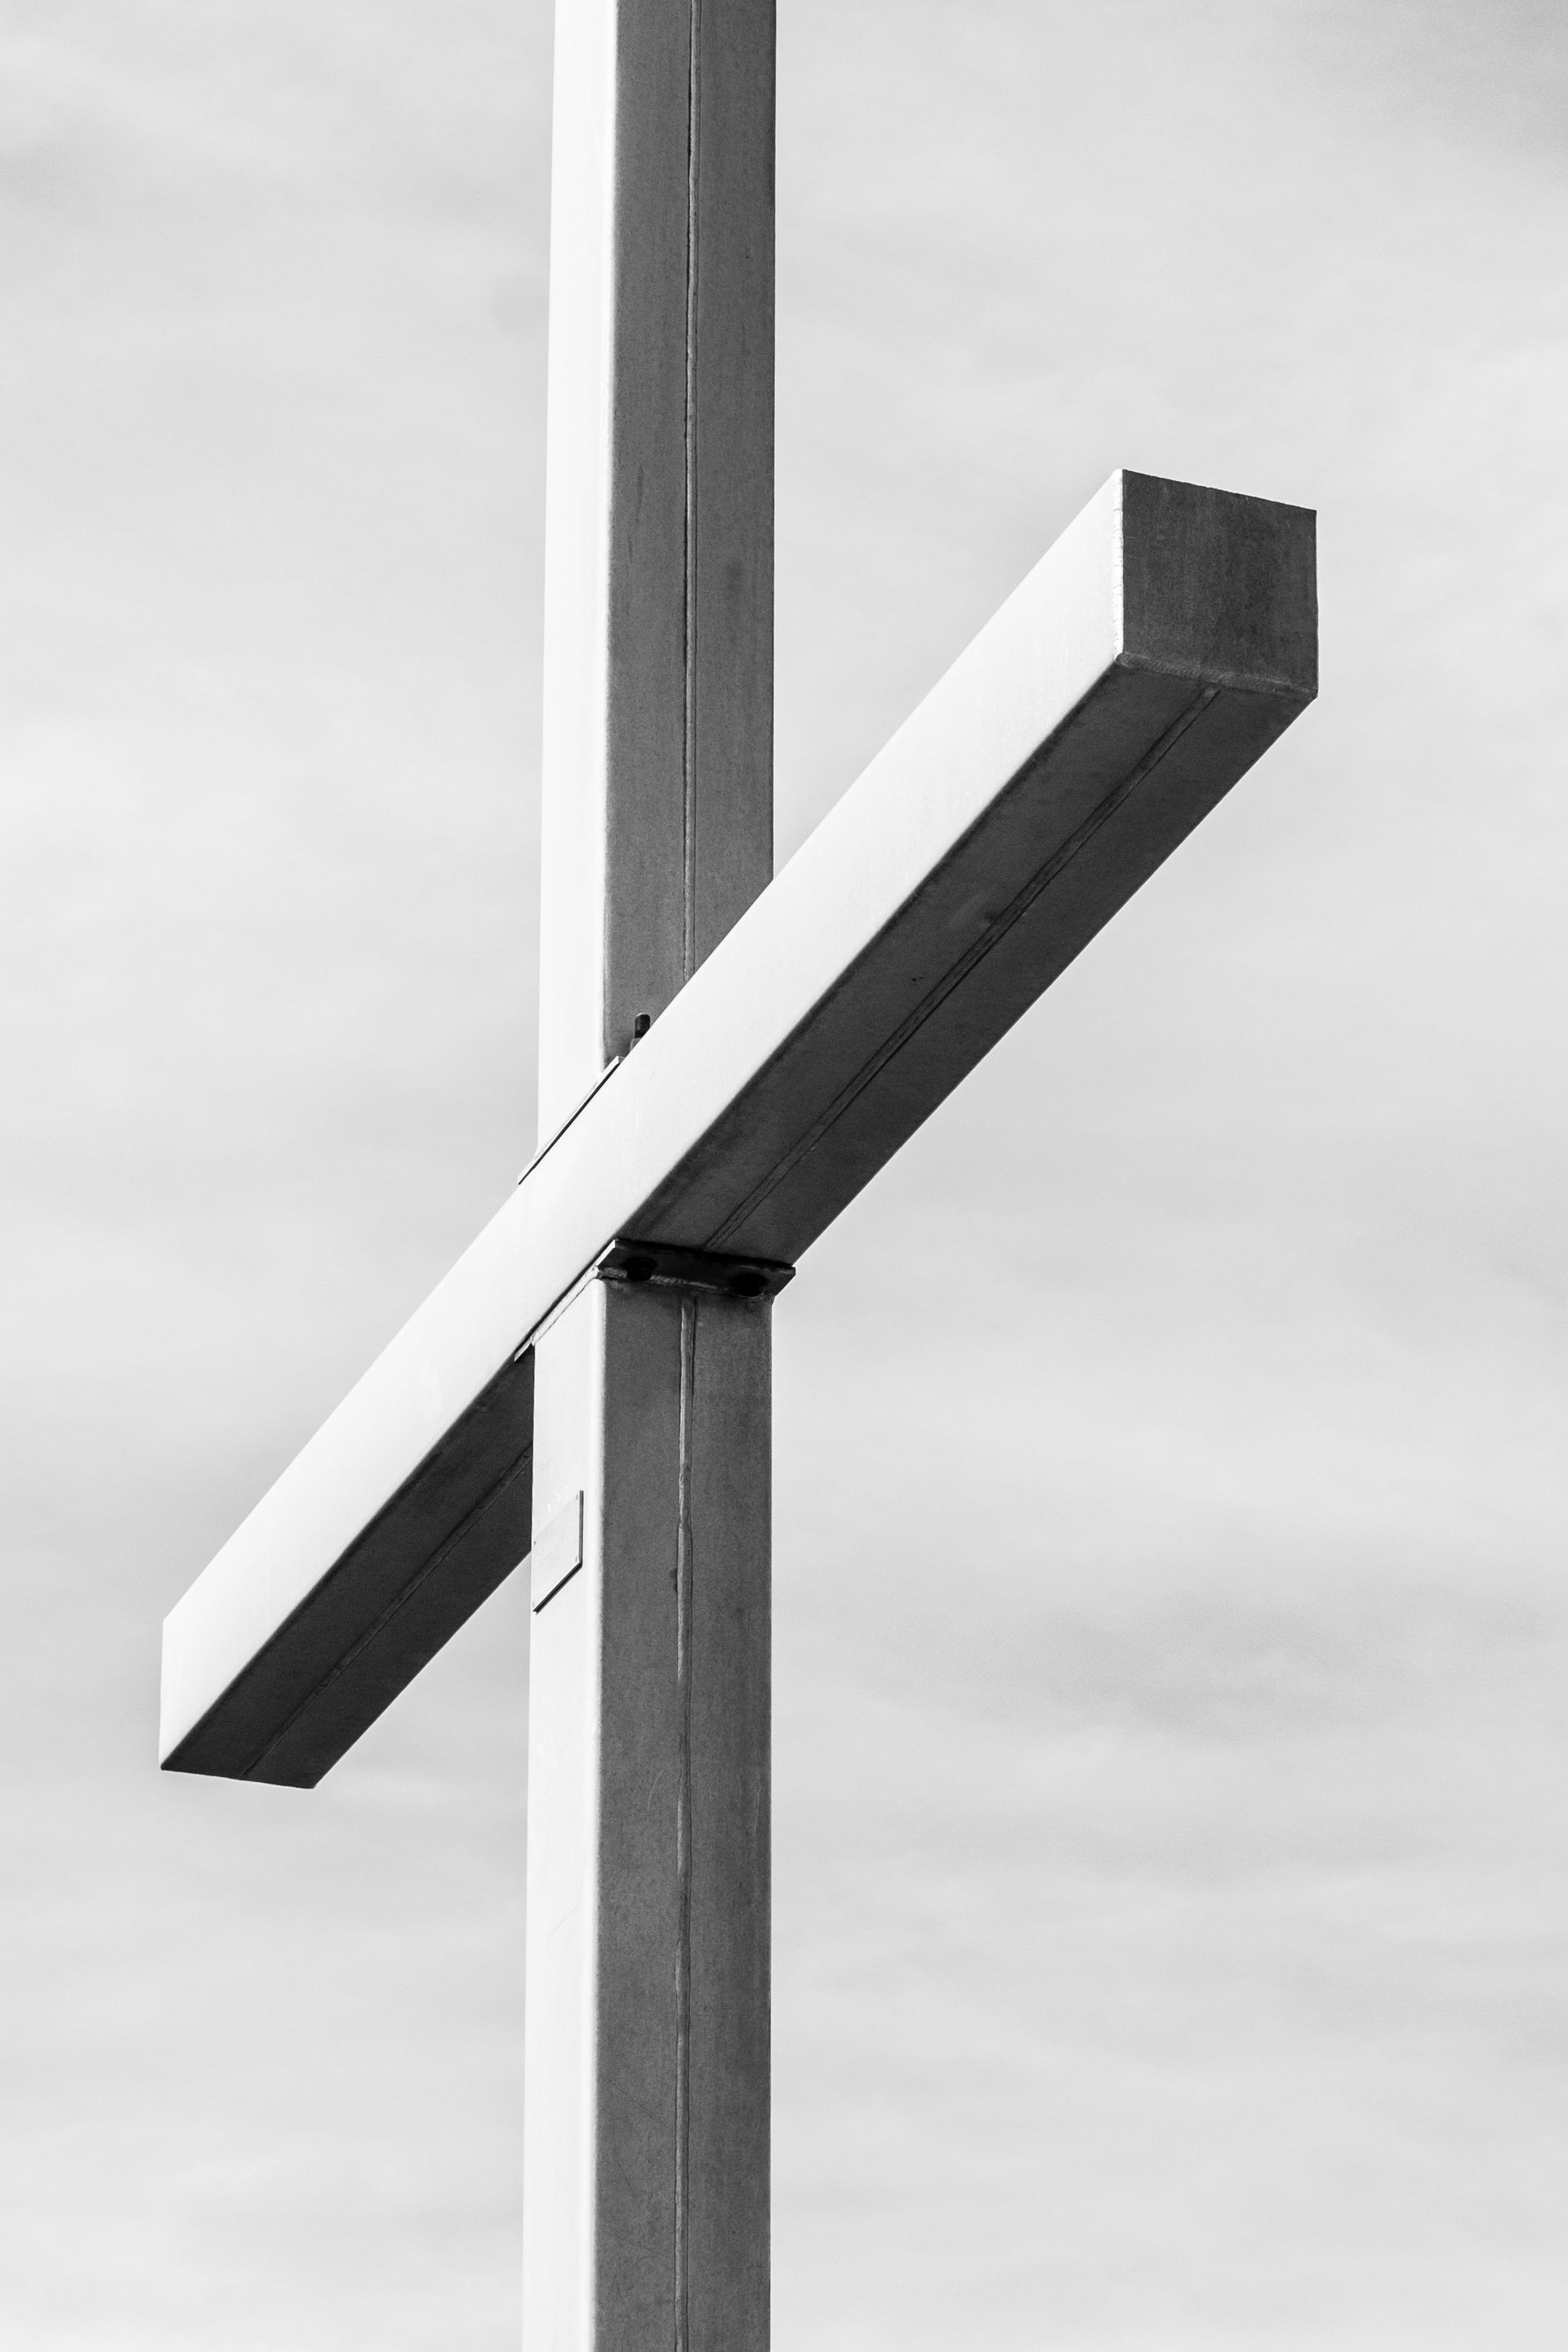 Giant metal cross in black and white